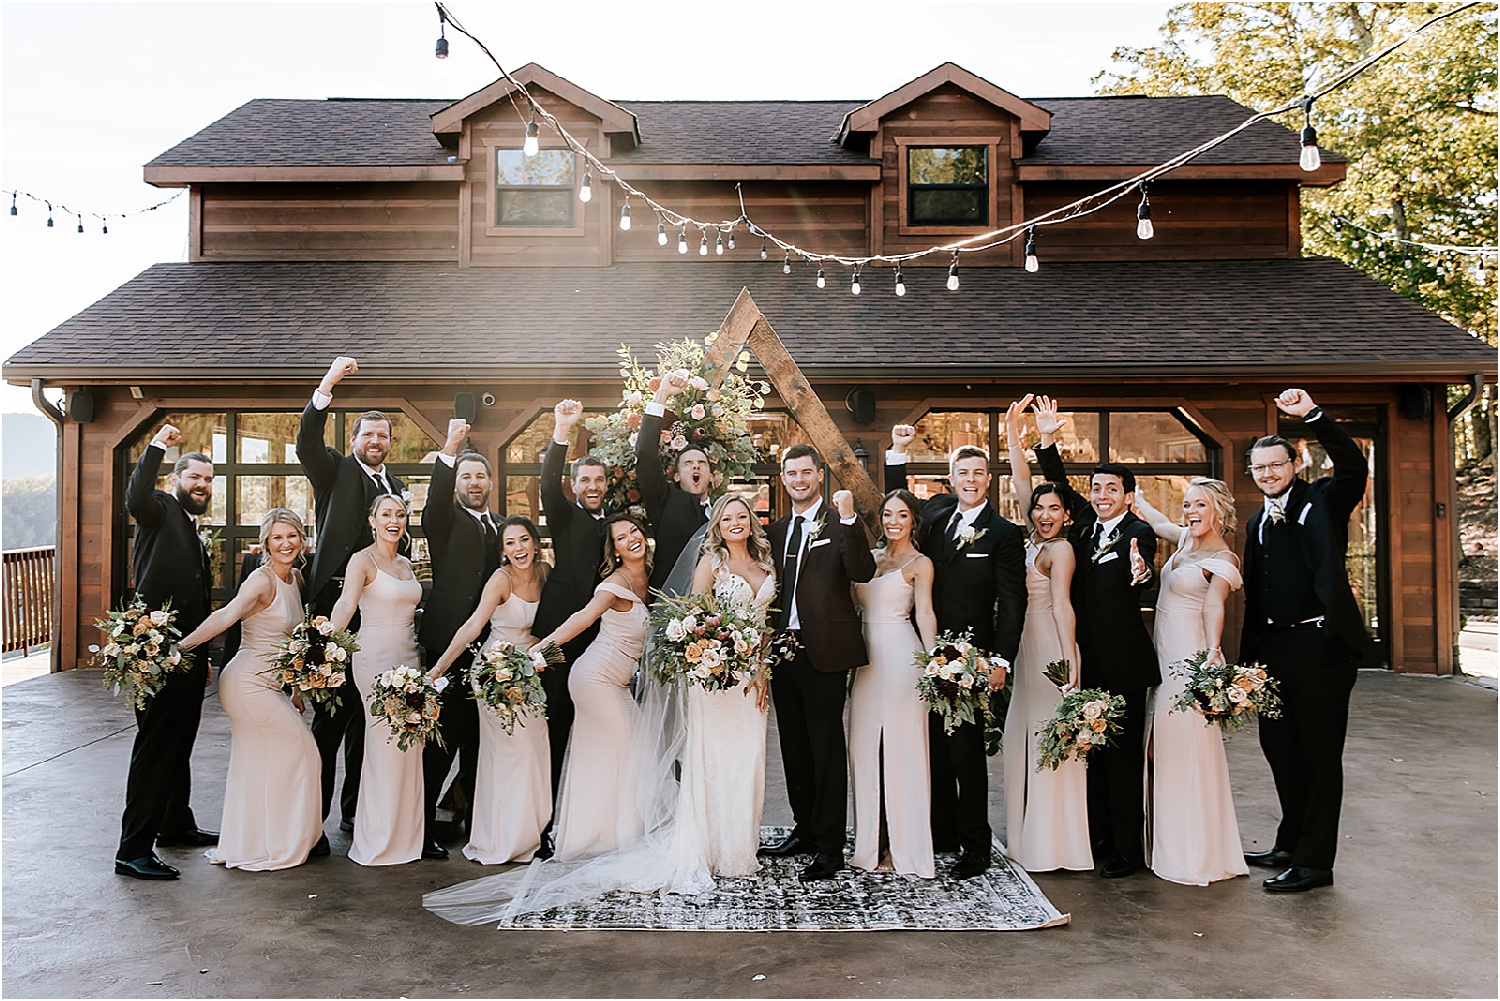 bridal party photos at The Magnolia Venue in Pigeon Forge, Tennessee